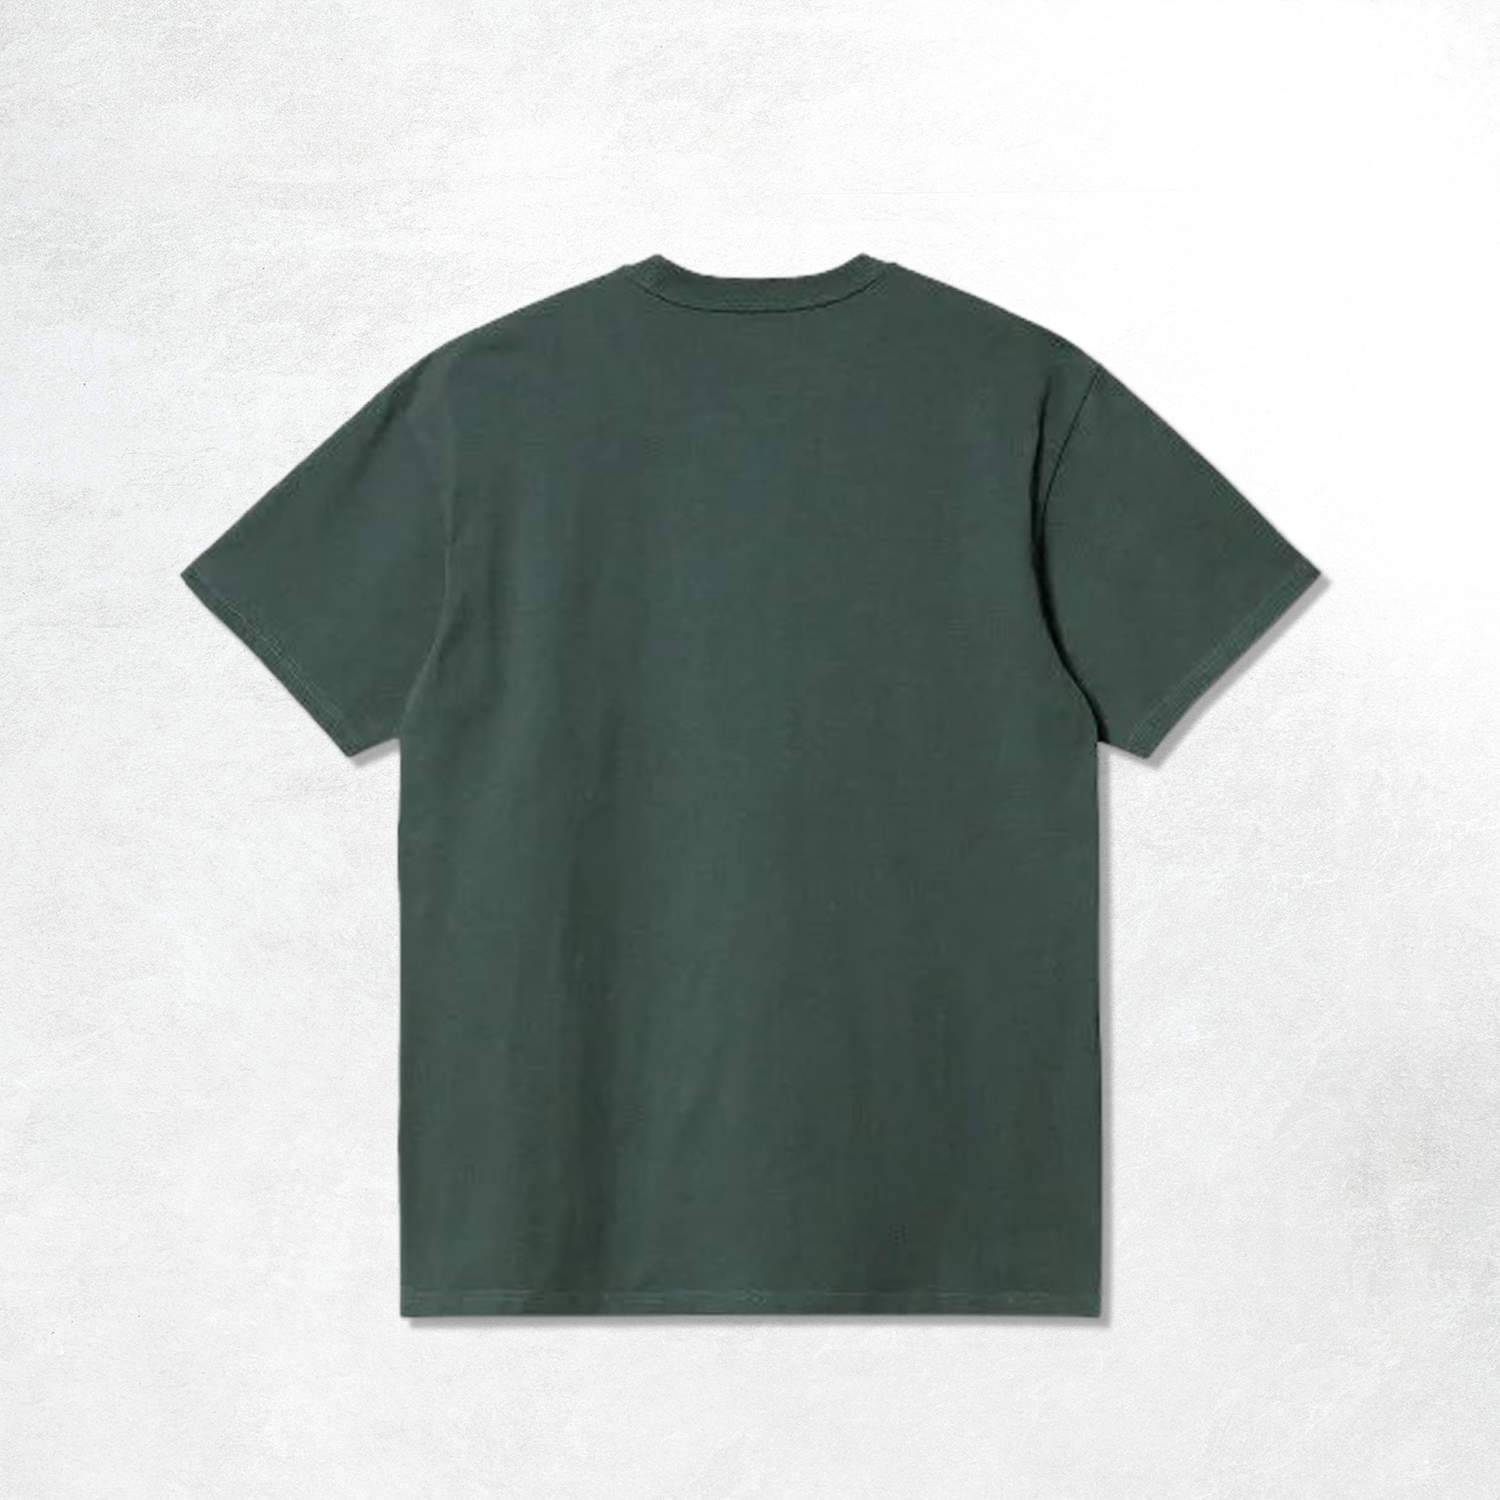 Carhartt WIP S/S Chase T-Shirt: Discovery Green/Gold.3